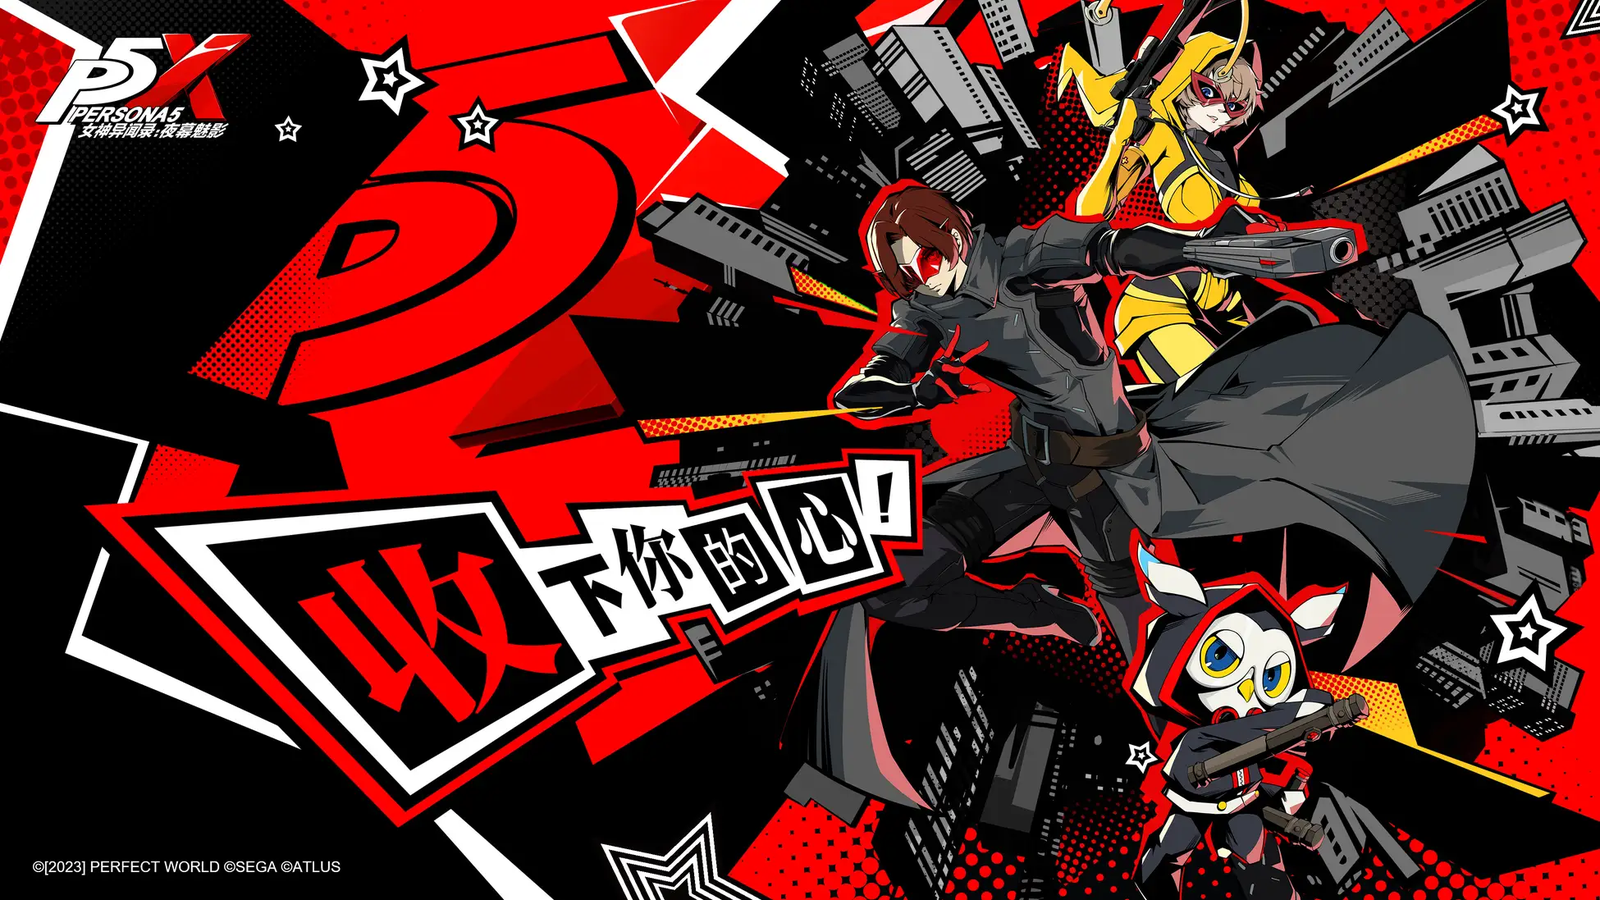 New Persona 5 spin-off game revealed